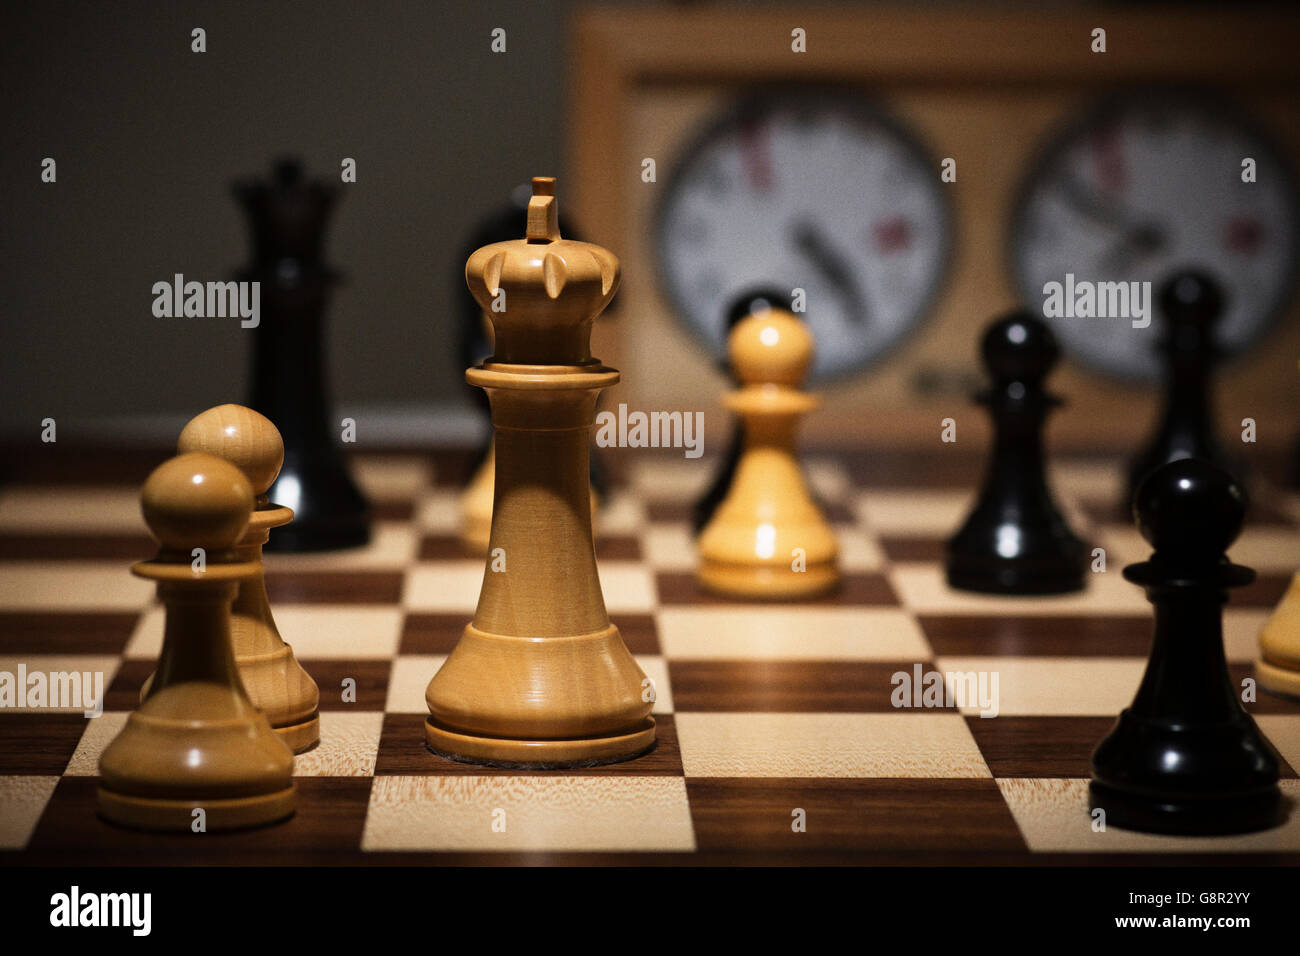 Chess board and pieces. Stock Photo